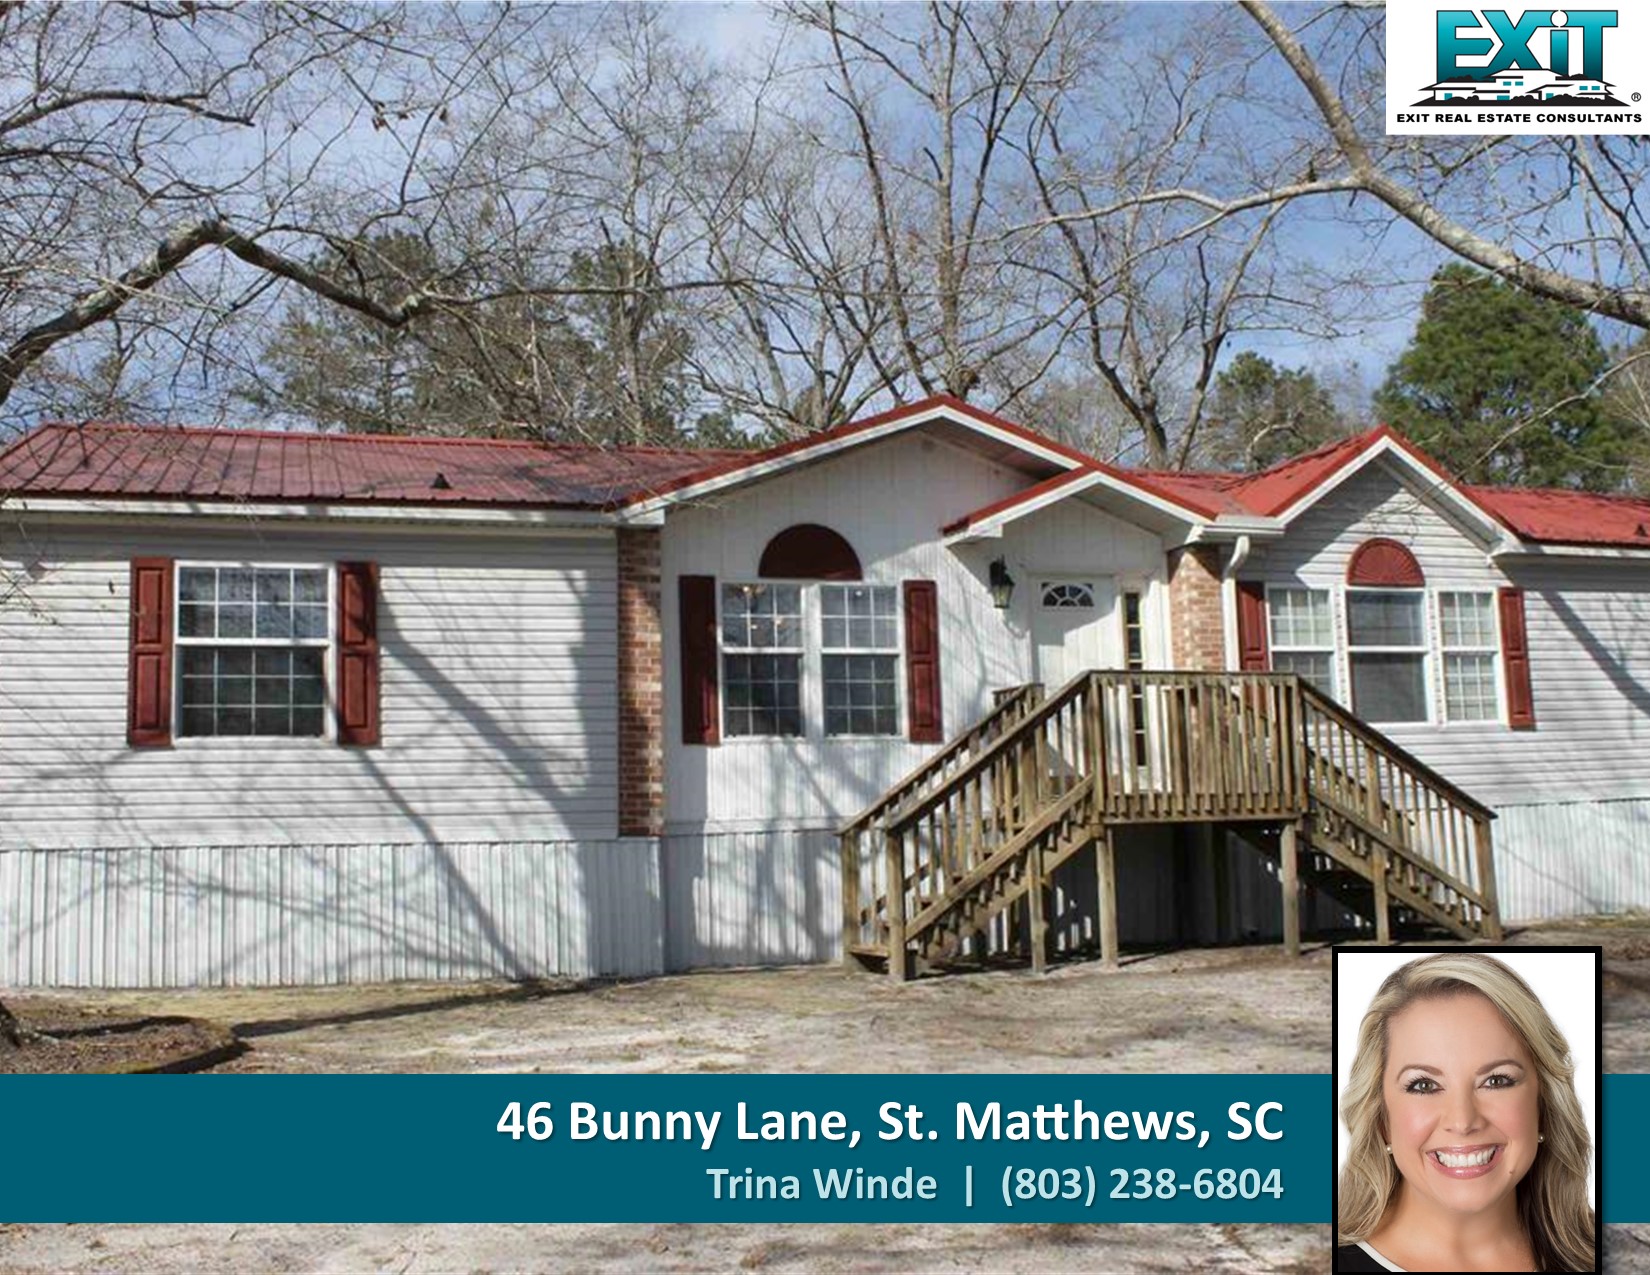 Just listed in St. Matthews